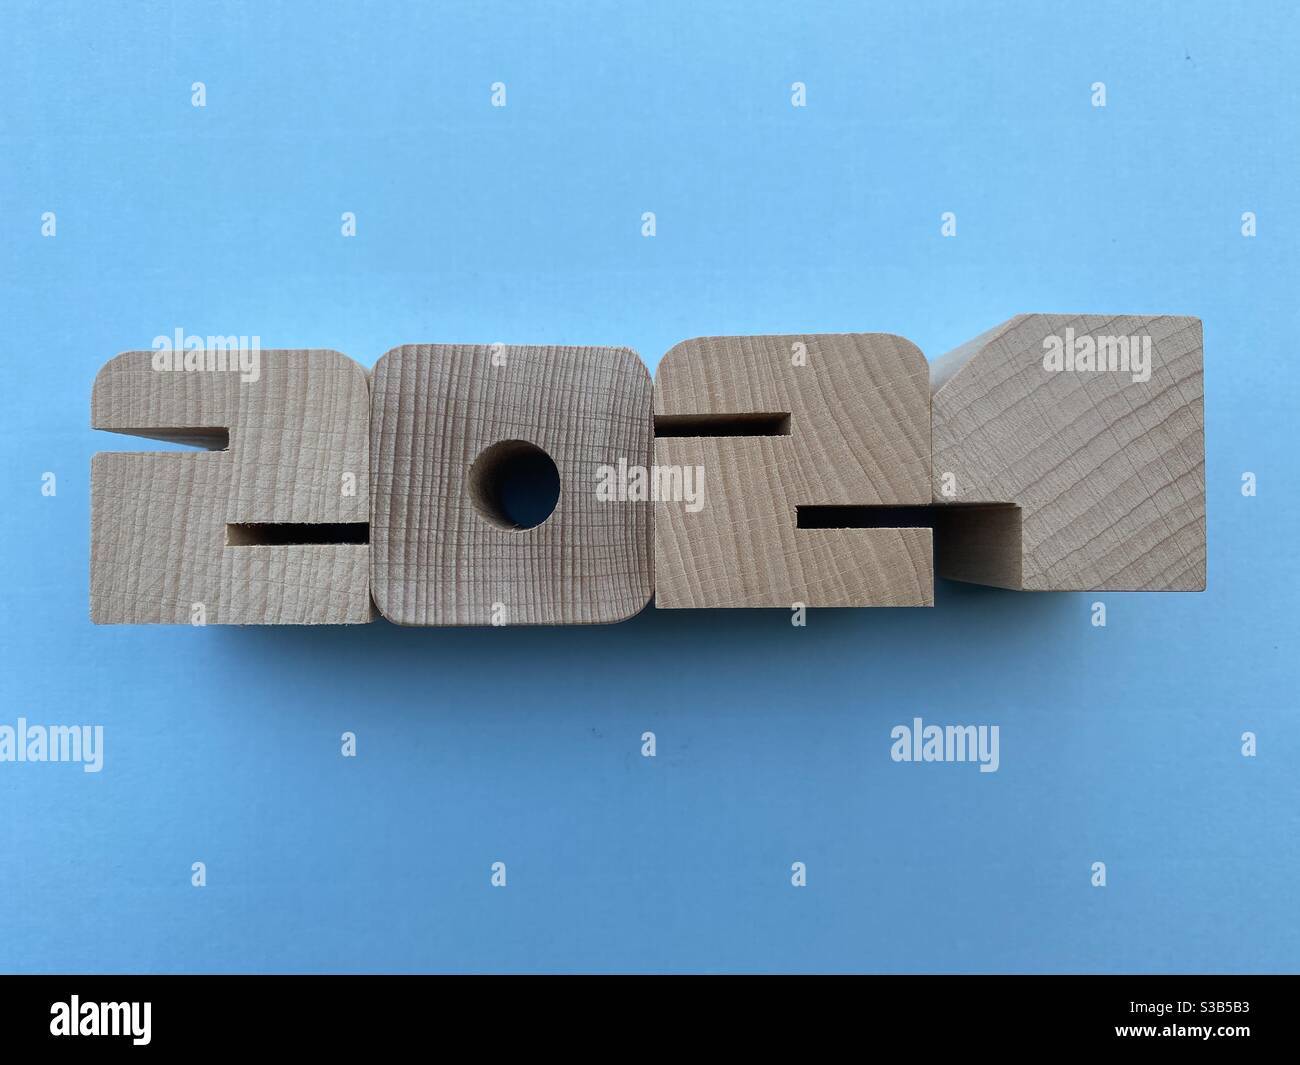 Year 2021 composed with wooden numbers over blue background Stock Photo